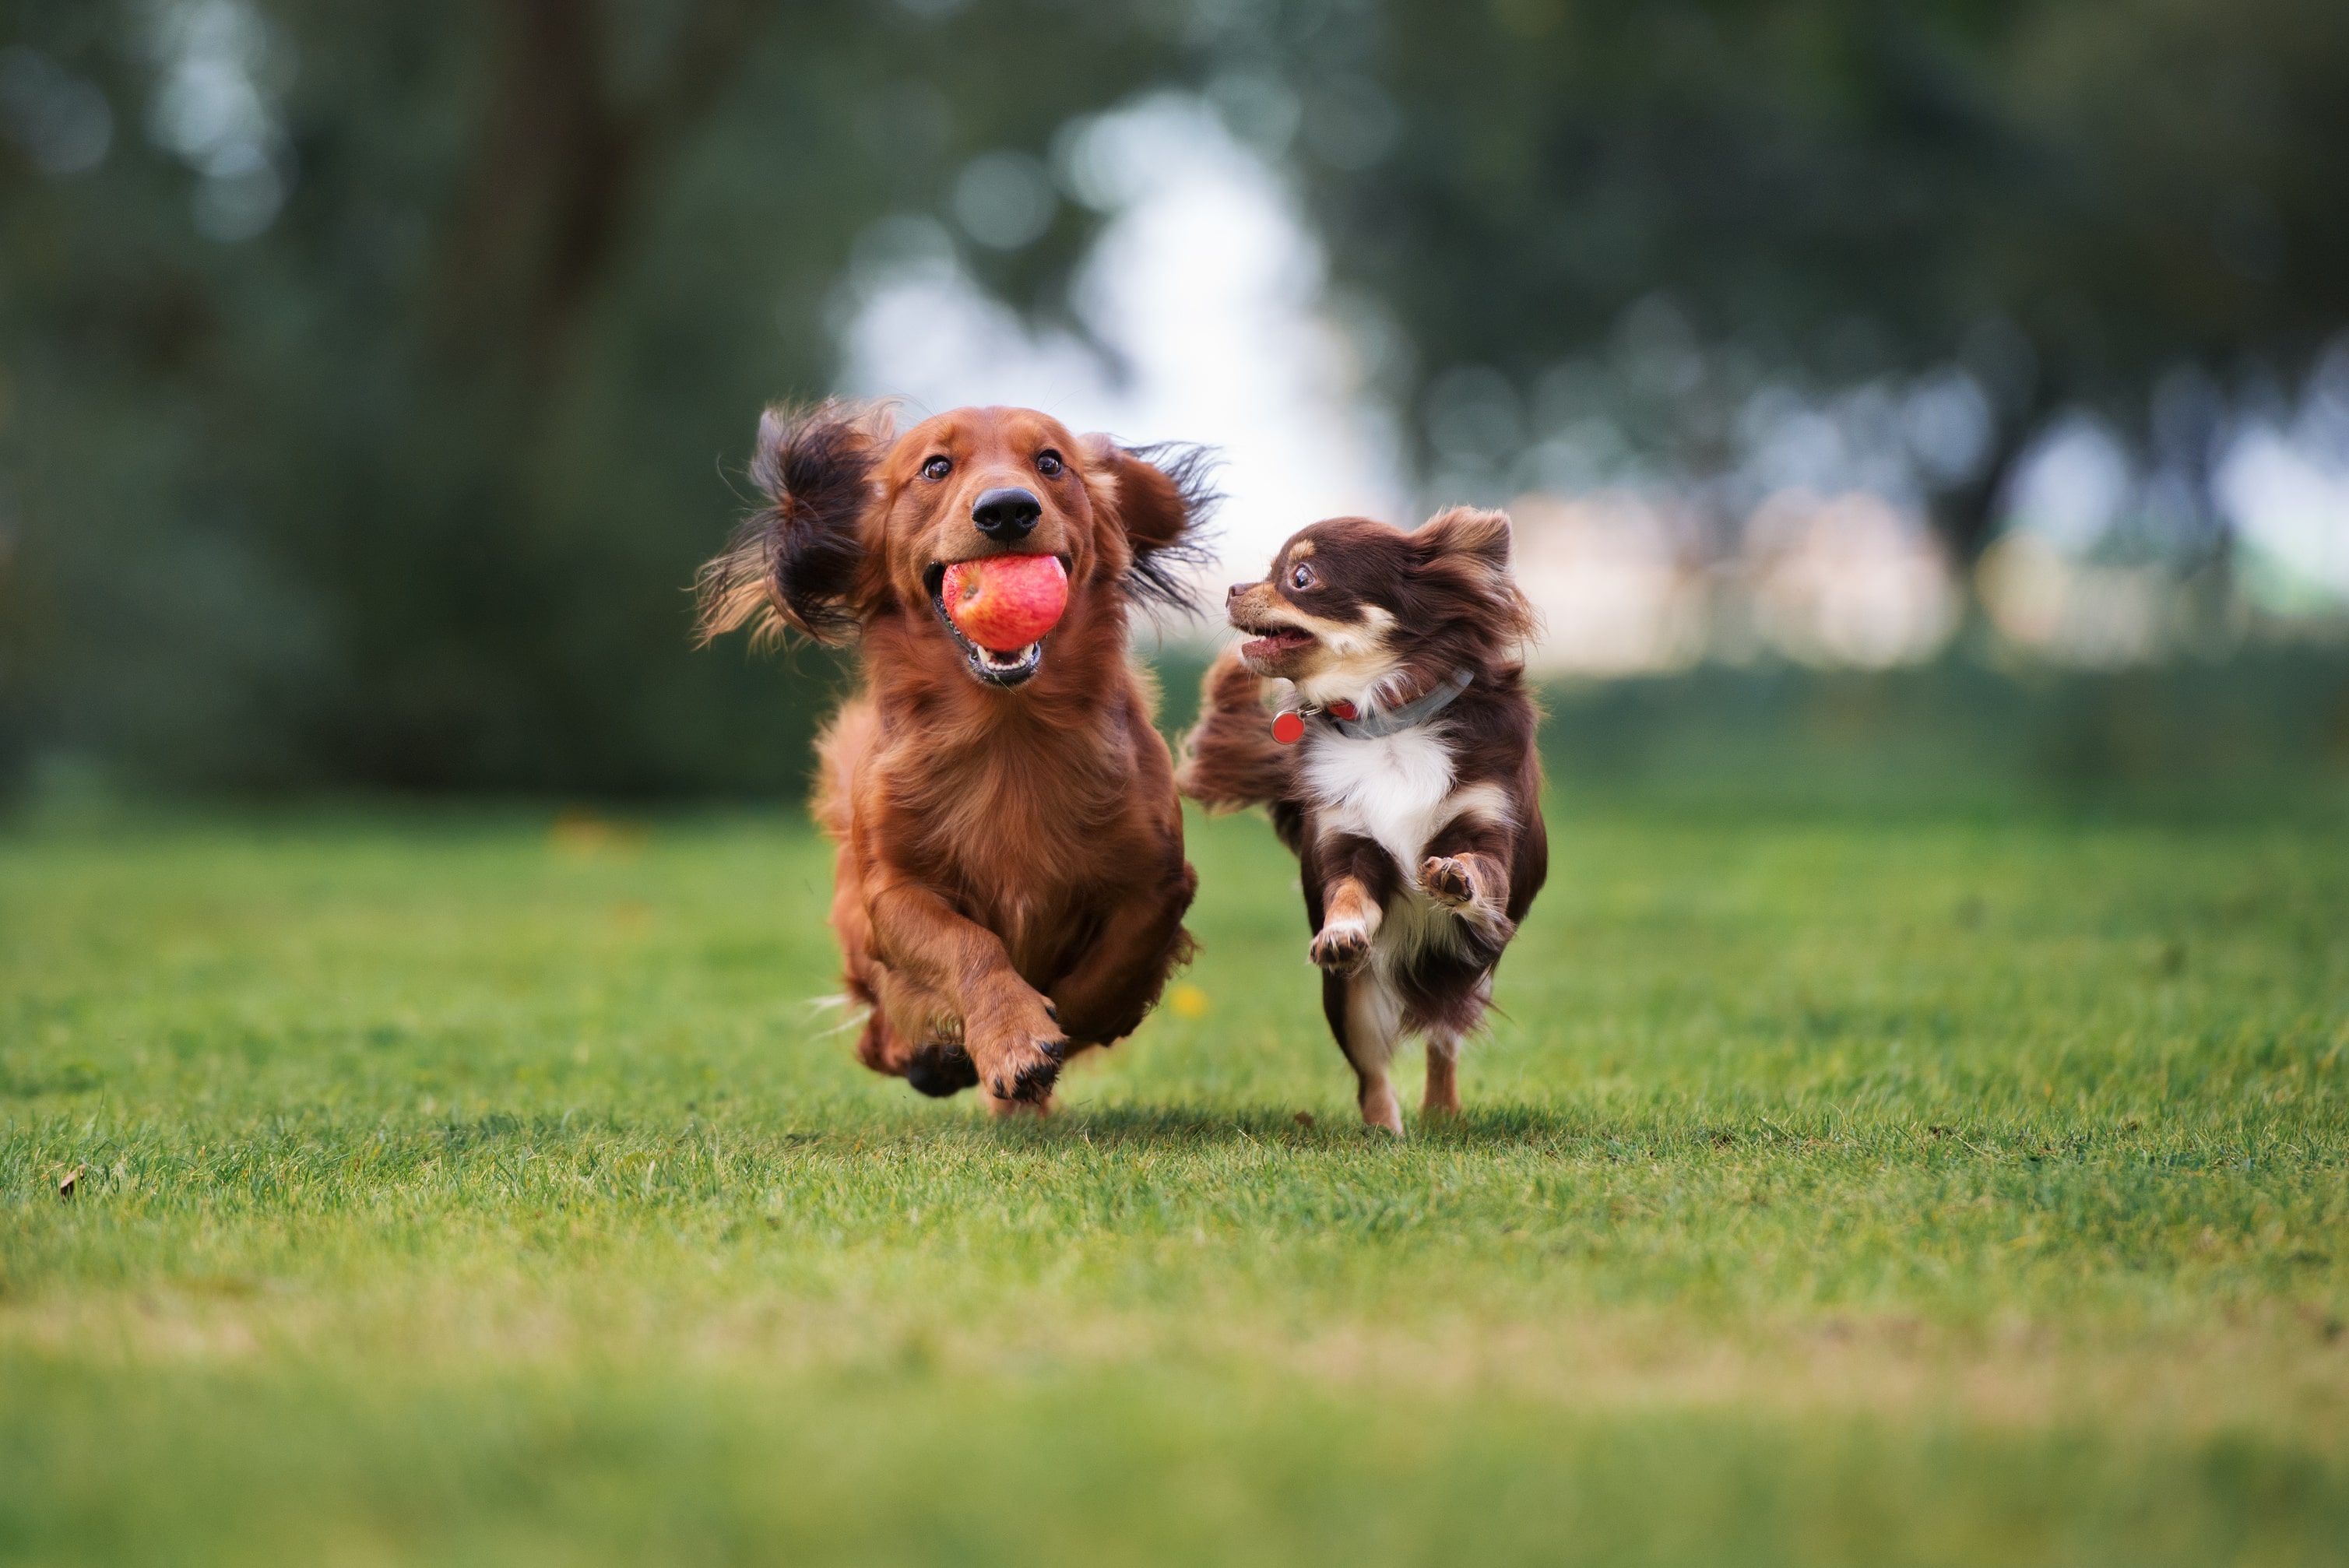 two dogs running together on the grass, with one of the dogs biting an apple